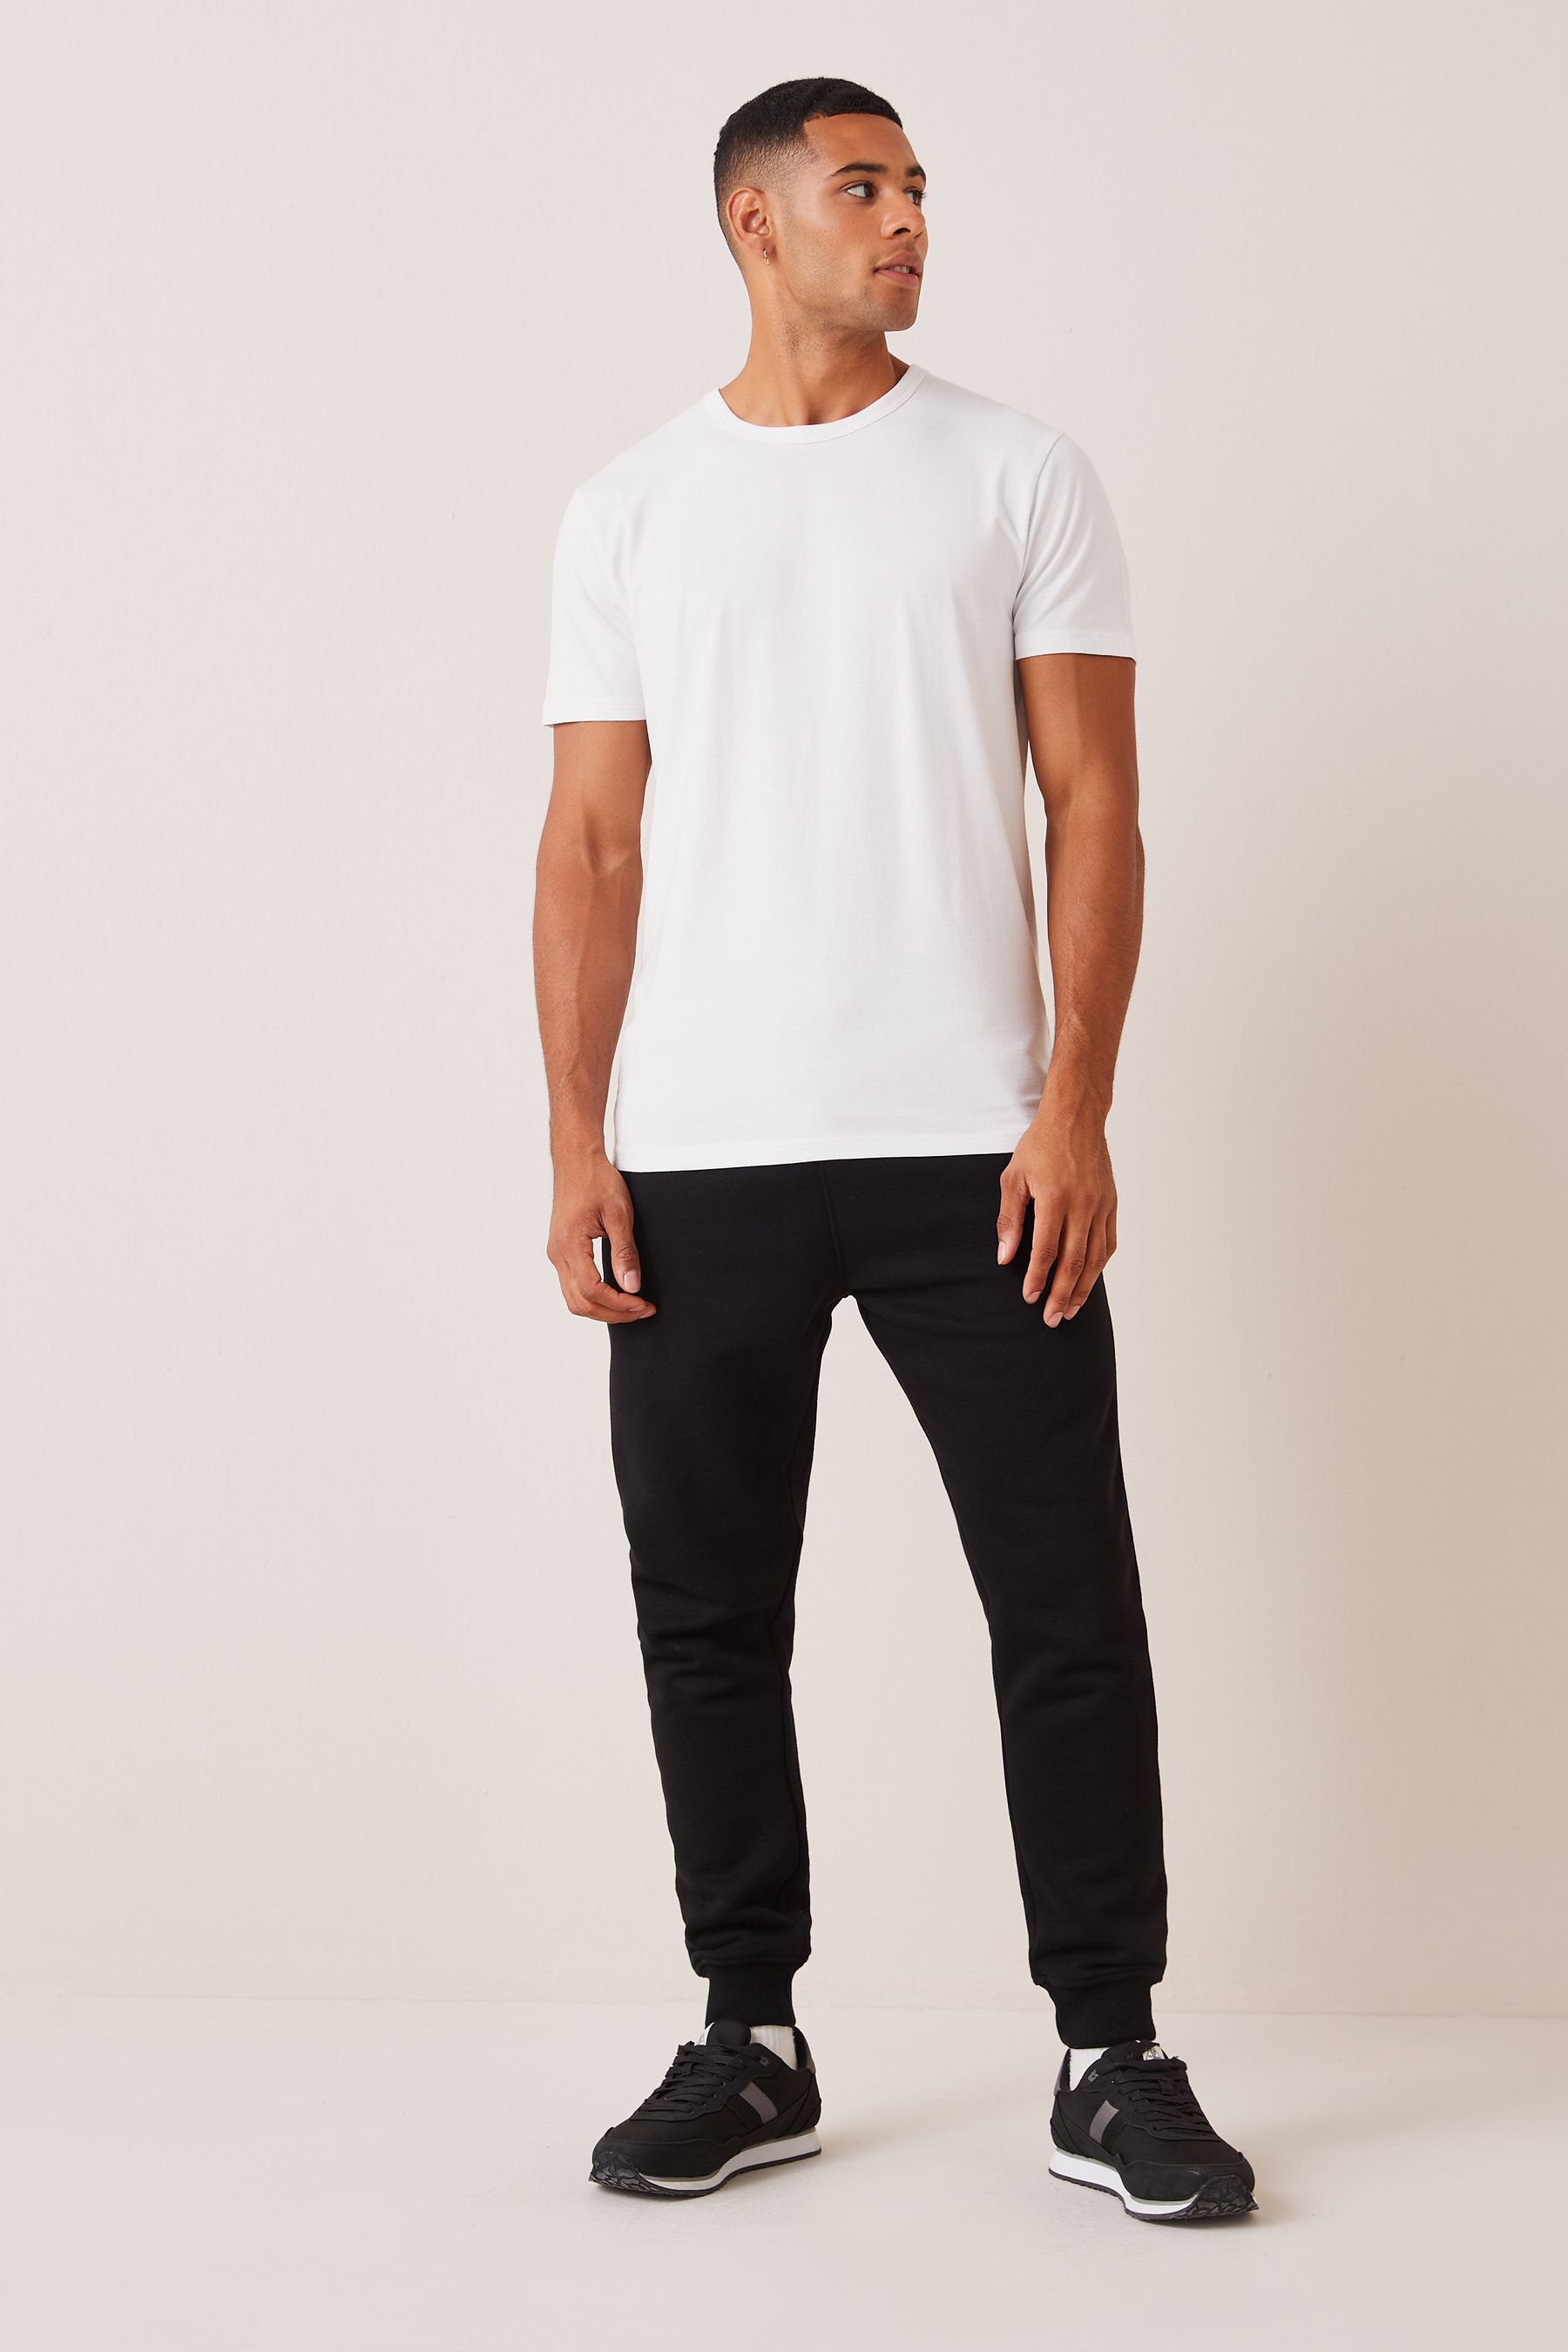 Buy White Slim Slim Fit T-Shirts 5 Pack from the Next UK online shop